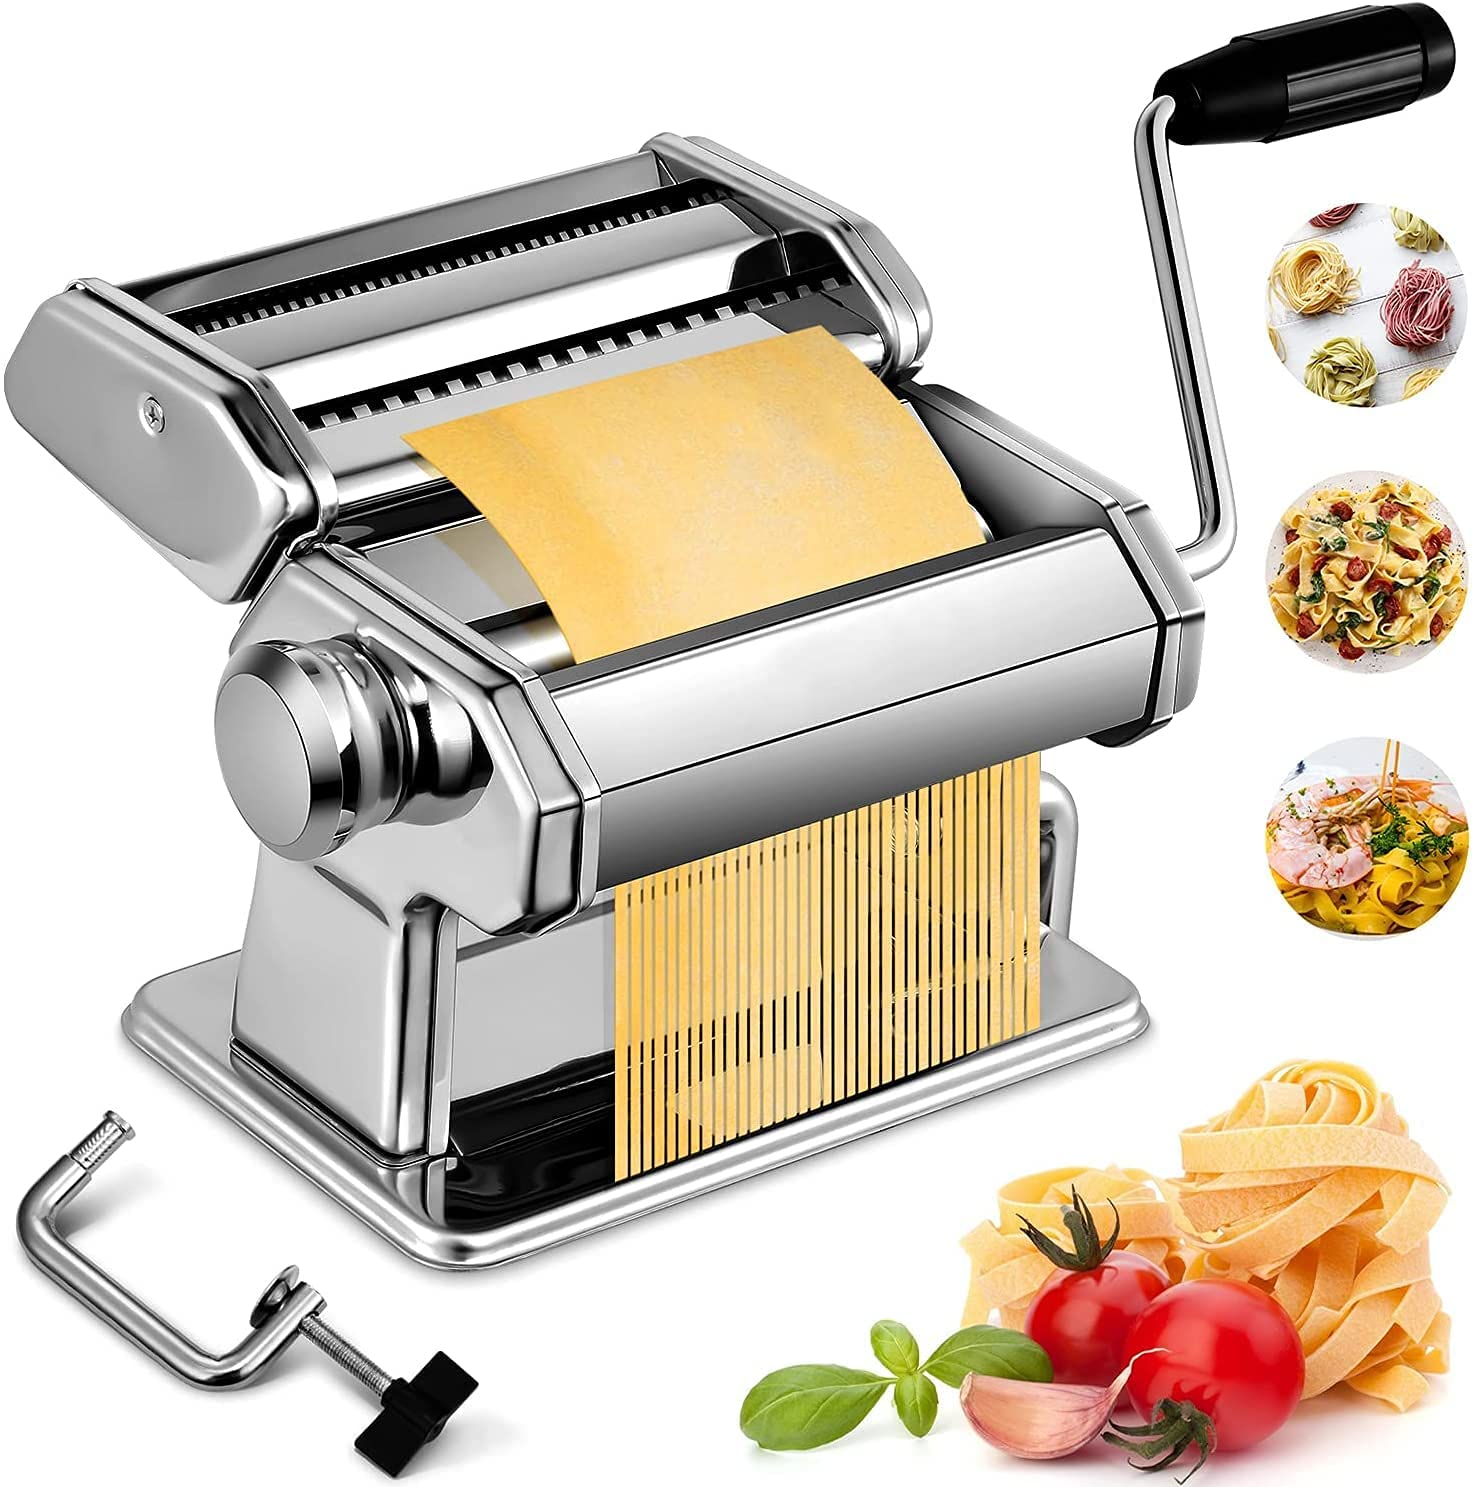 Pasta Maker, 150 Pasta Roller Noodle Maker Machine with 9 Adjustable  Thickness Settings, Perfect for Spaghetti, Fettuccini, Lasagna or Dumpling  Skins